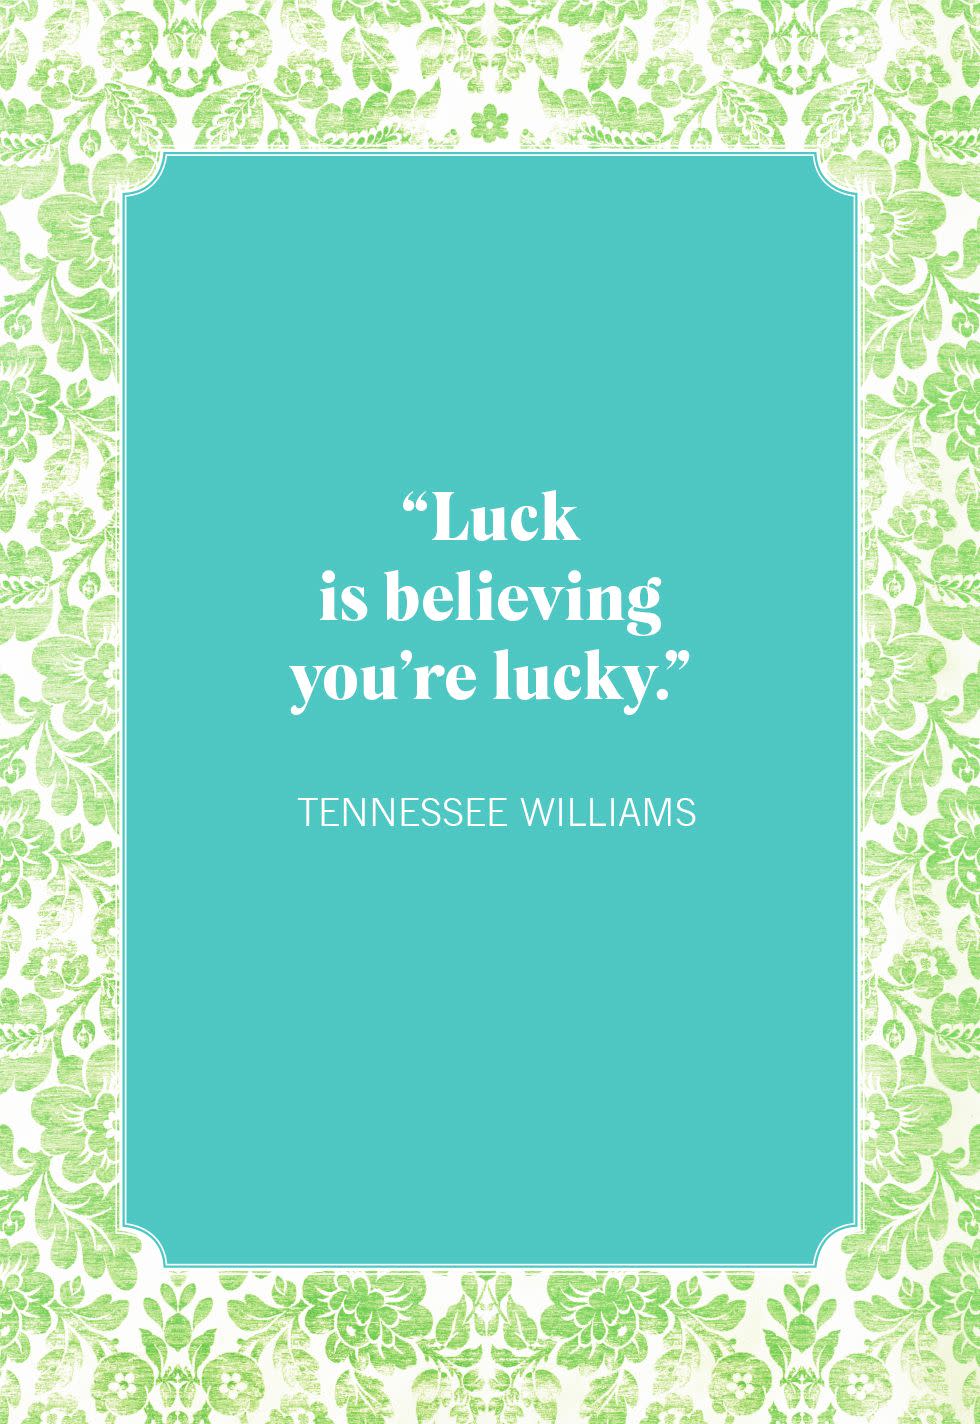 st patricks day quotes tennessee williams